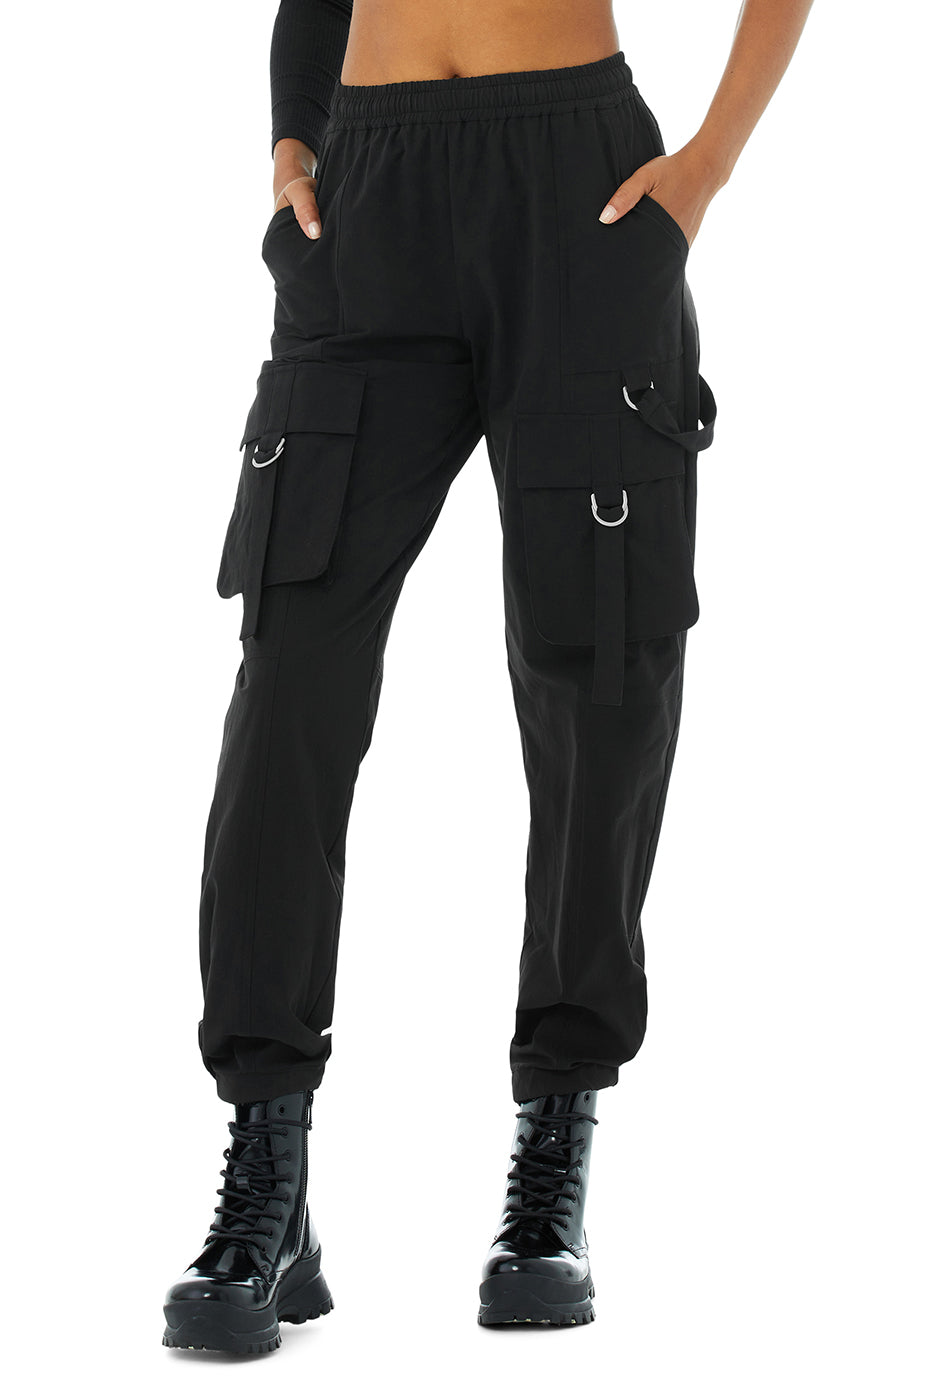 High-Waist City Wise Cargo Pants in Black by Alo Yoga - Work Well Daily